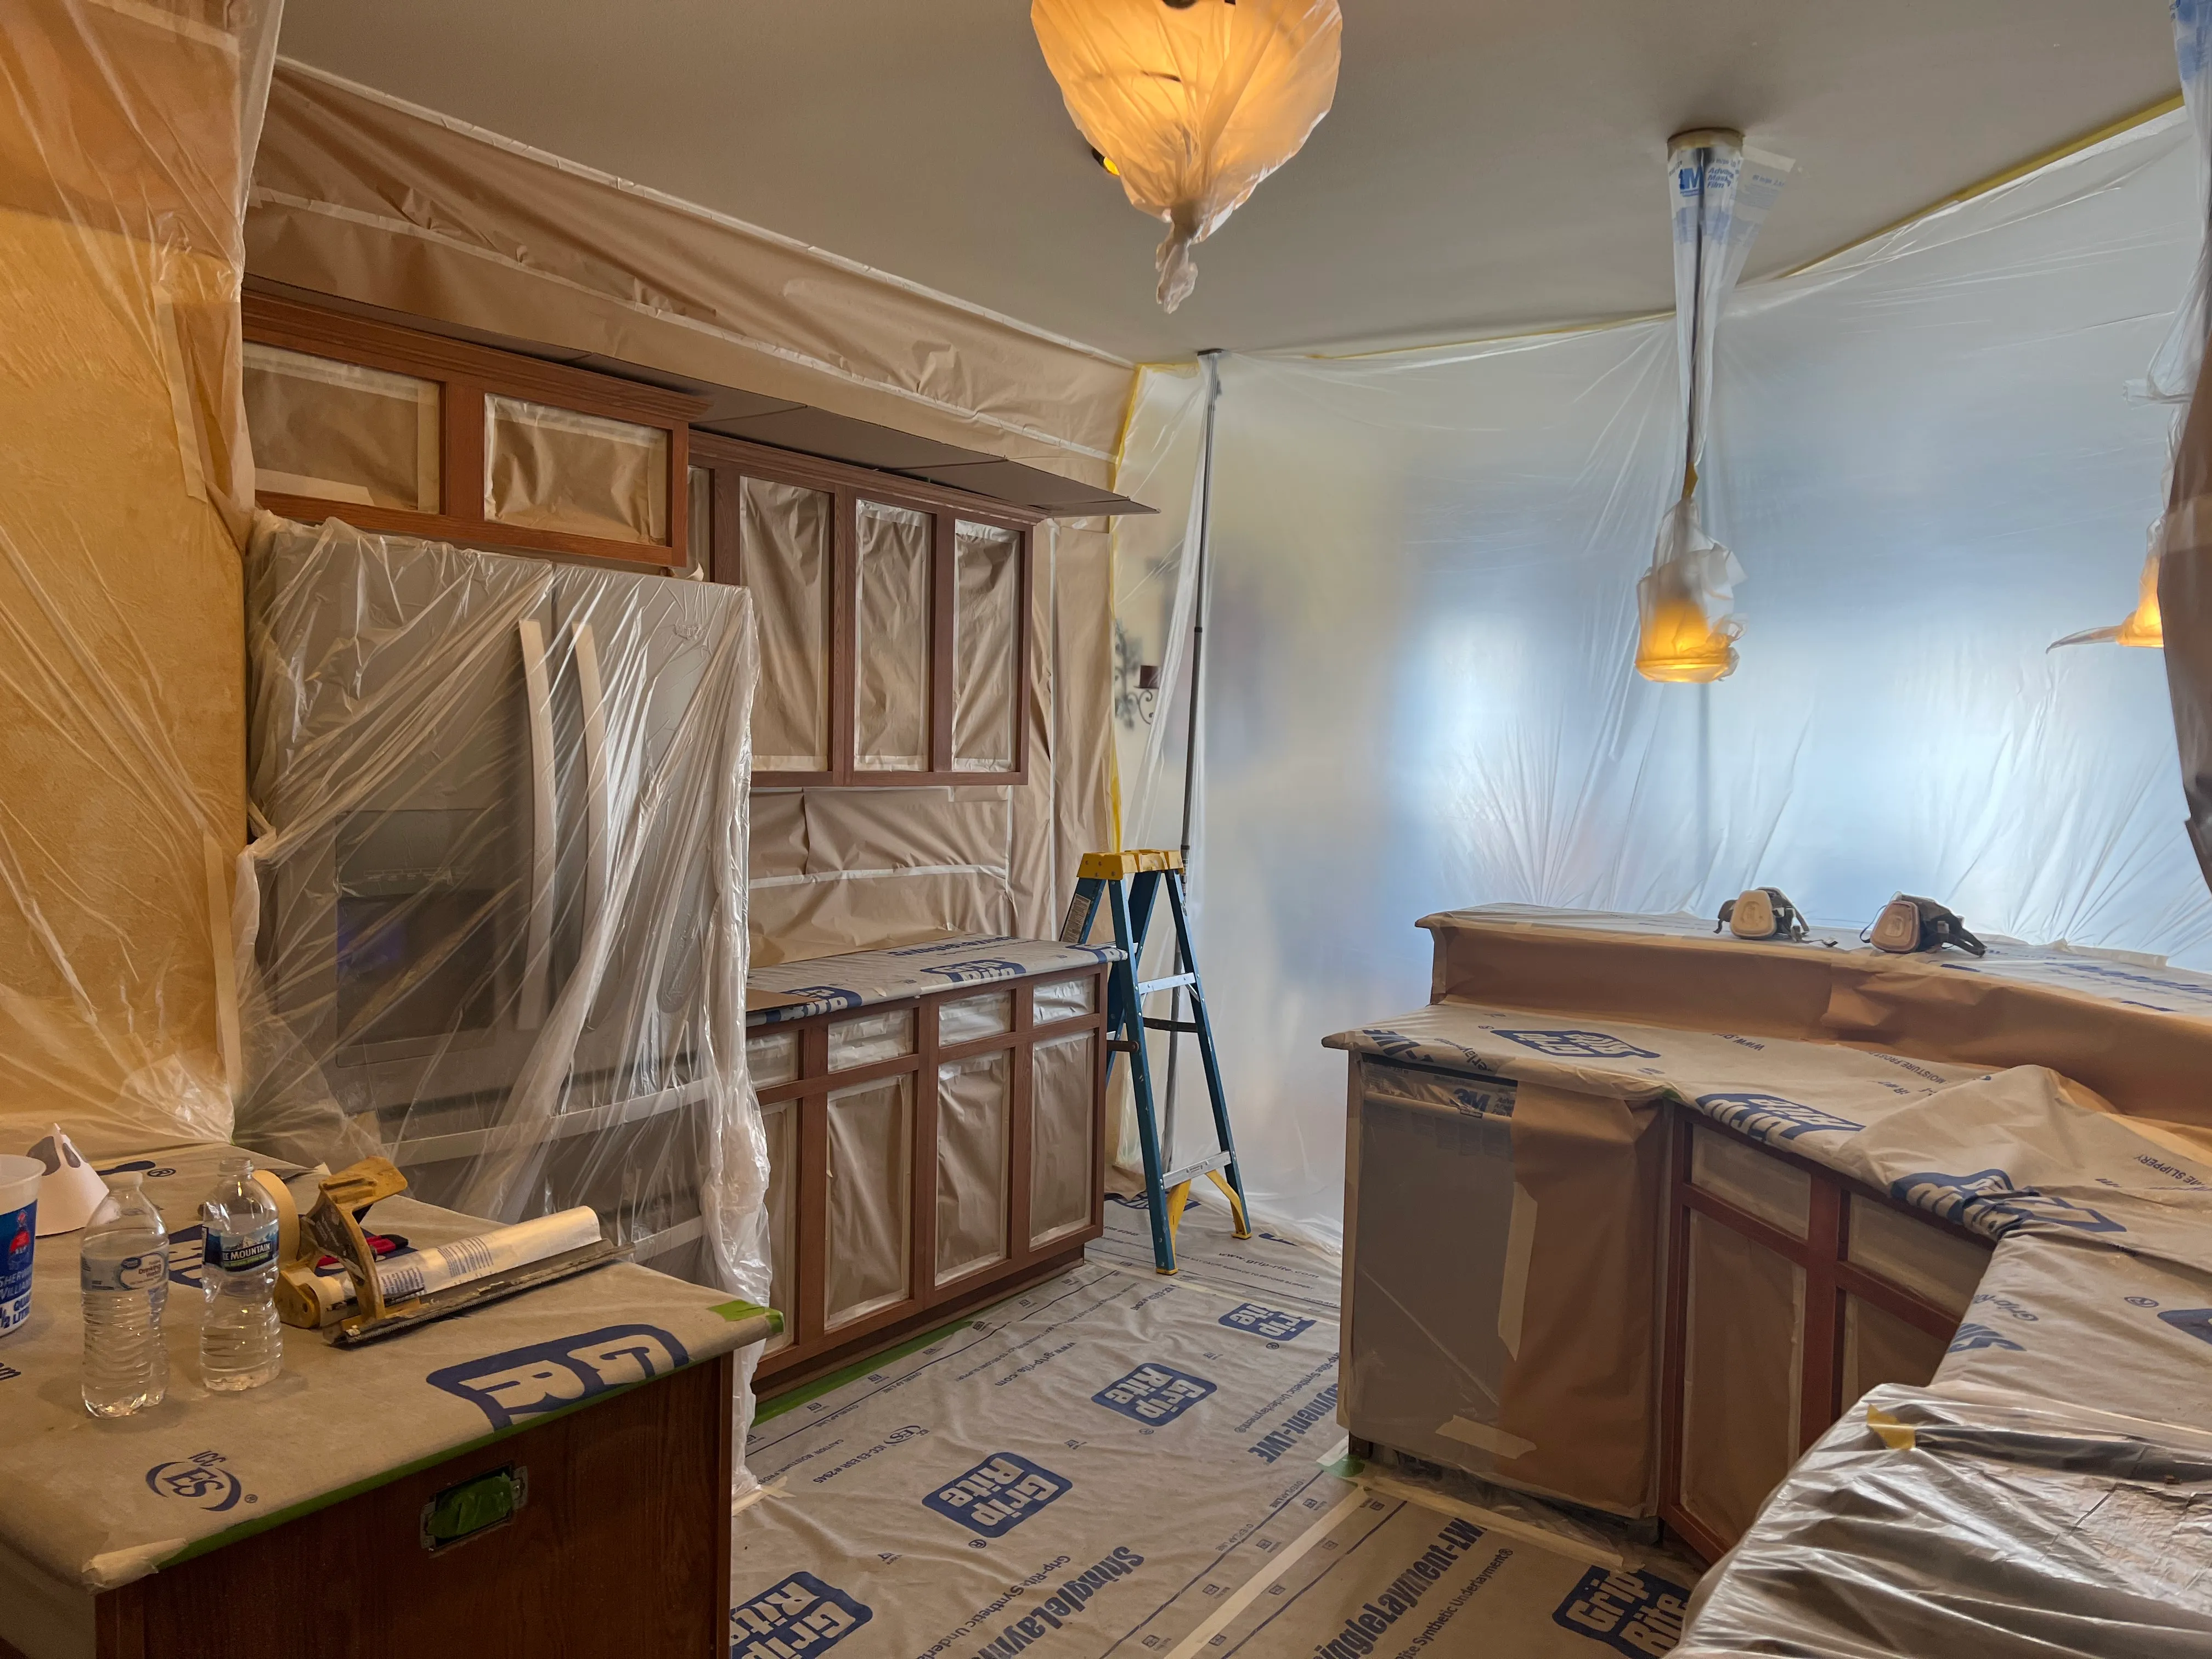 Interior Painting for Pirrung Painting in Sheboygan, Wisconsin